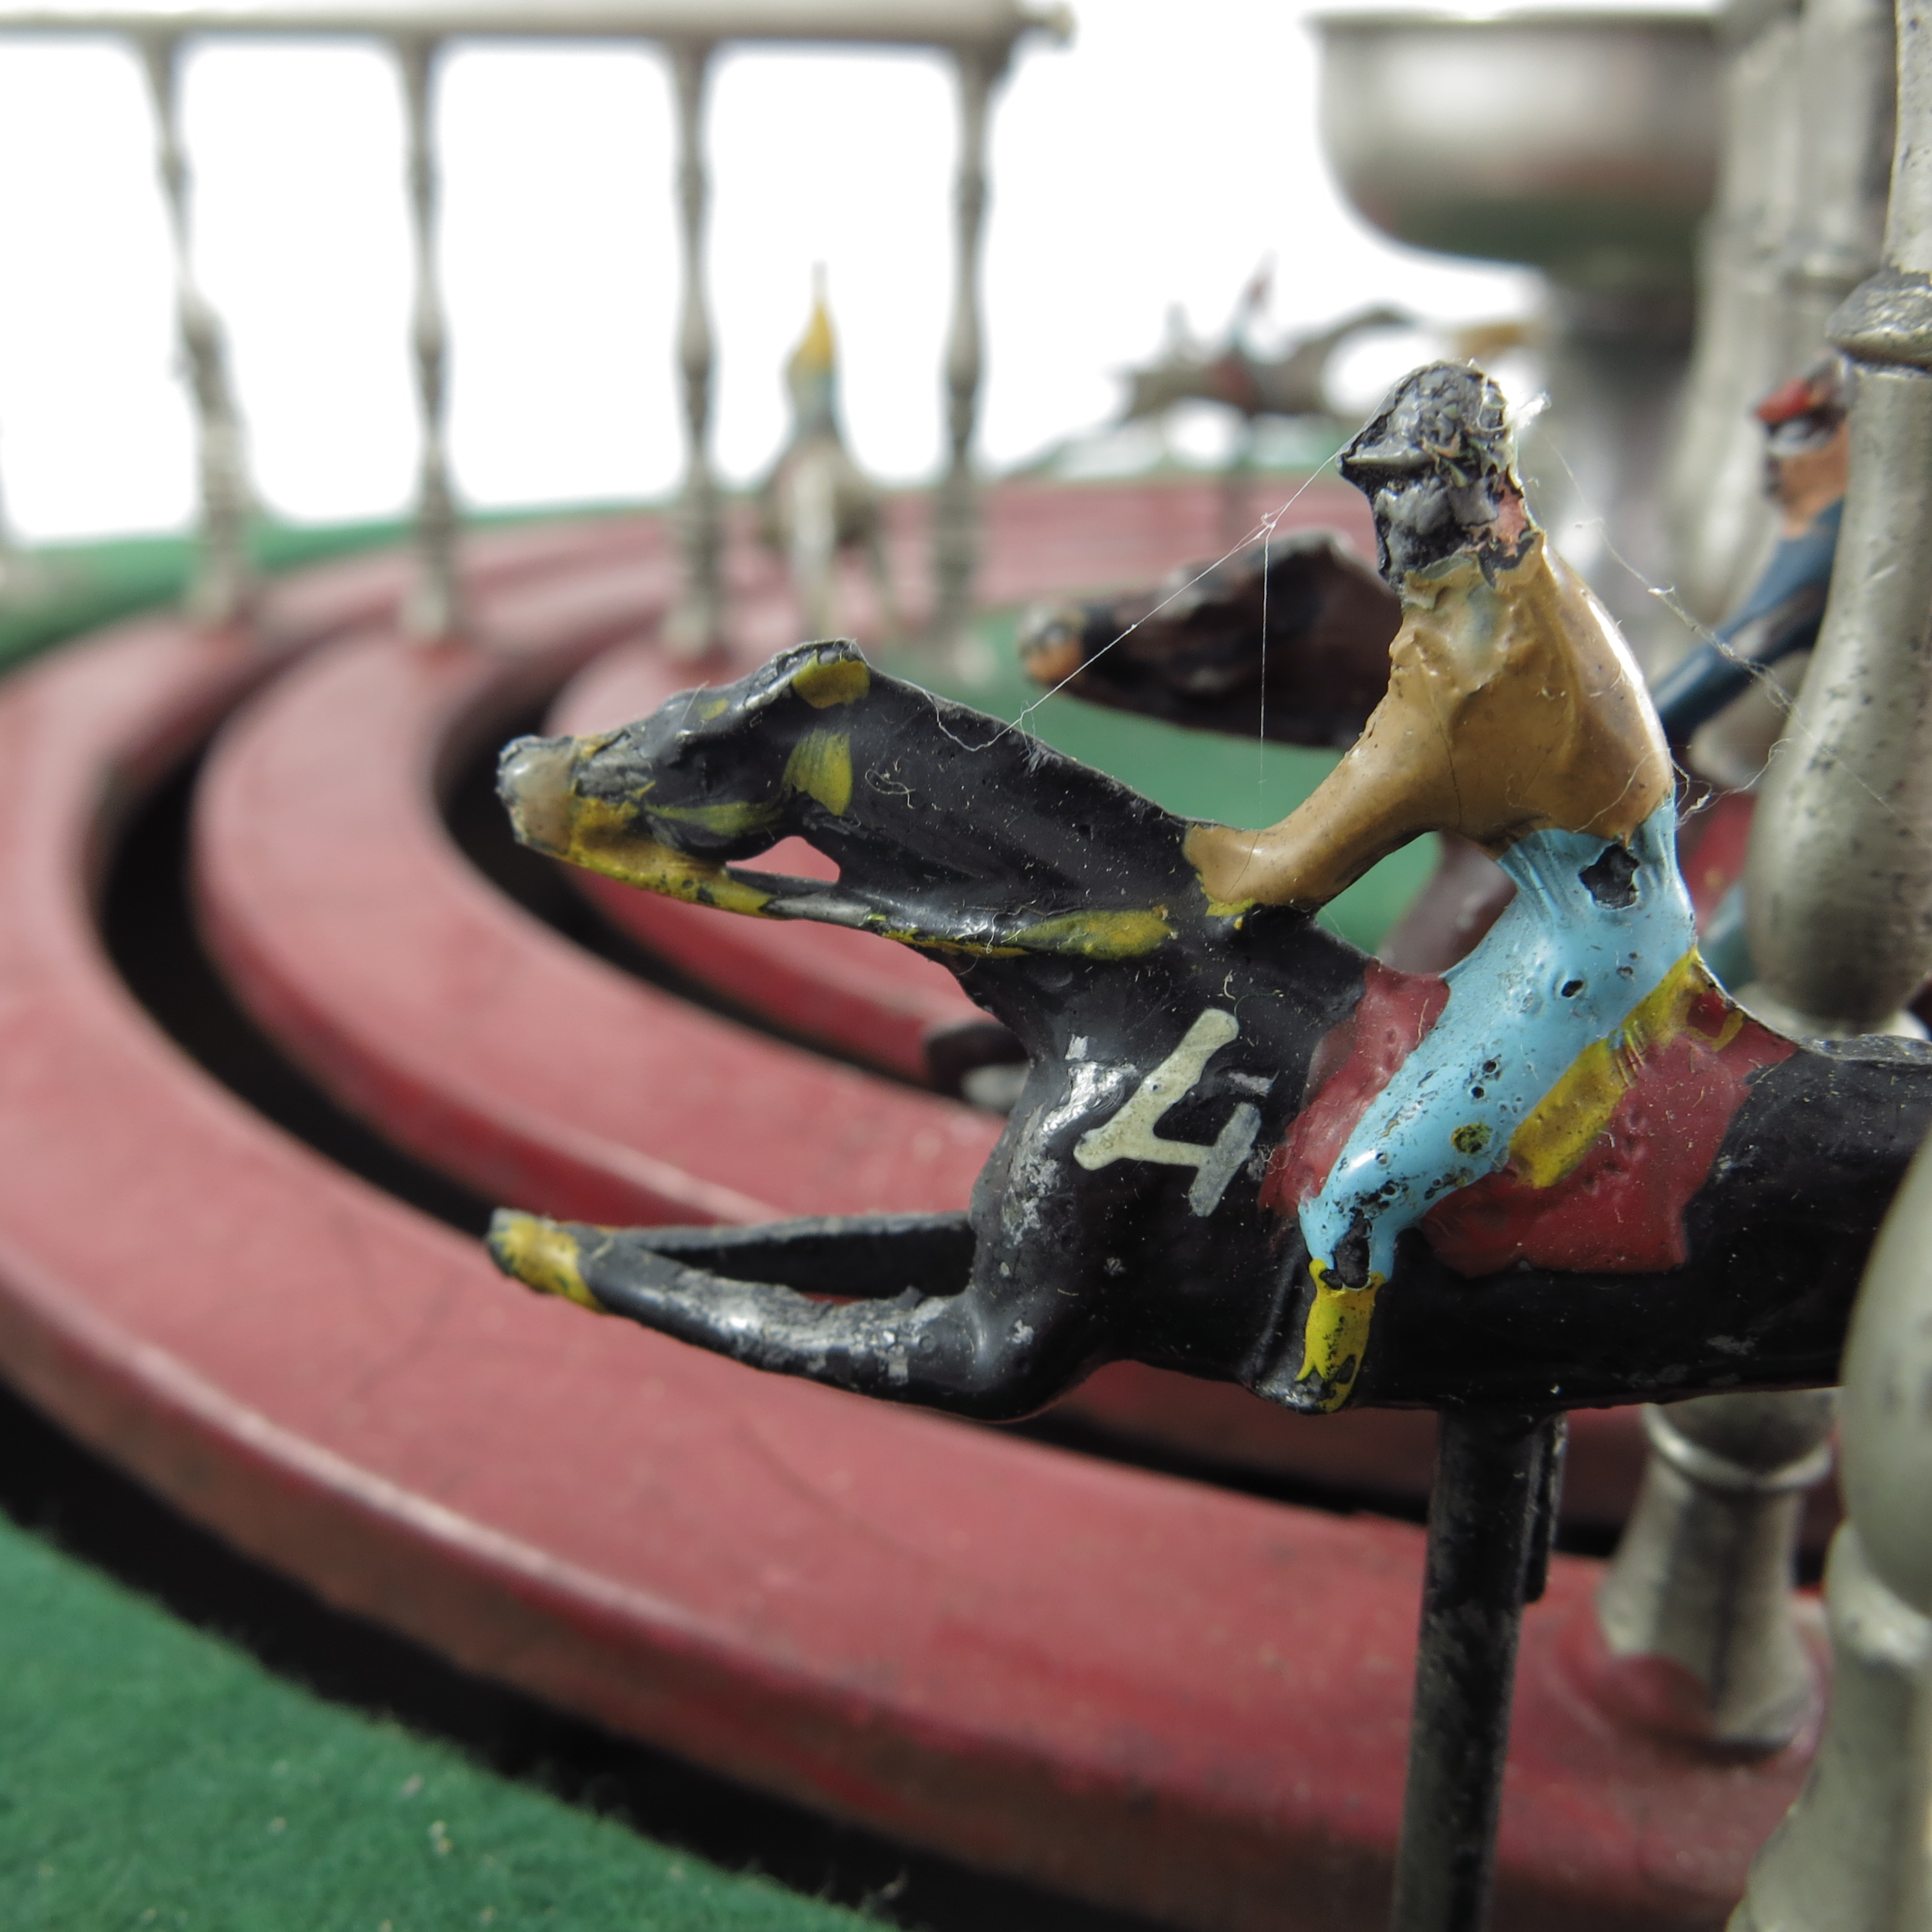 JOEP, AN EARLY 20TH CENTURY FRENCH MECHANICAL HORSE RACING GAME, 'JEU DE COURSE' - Image 2 of 7